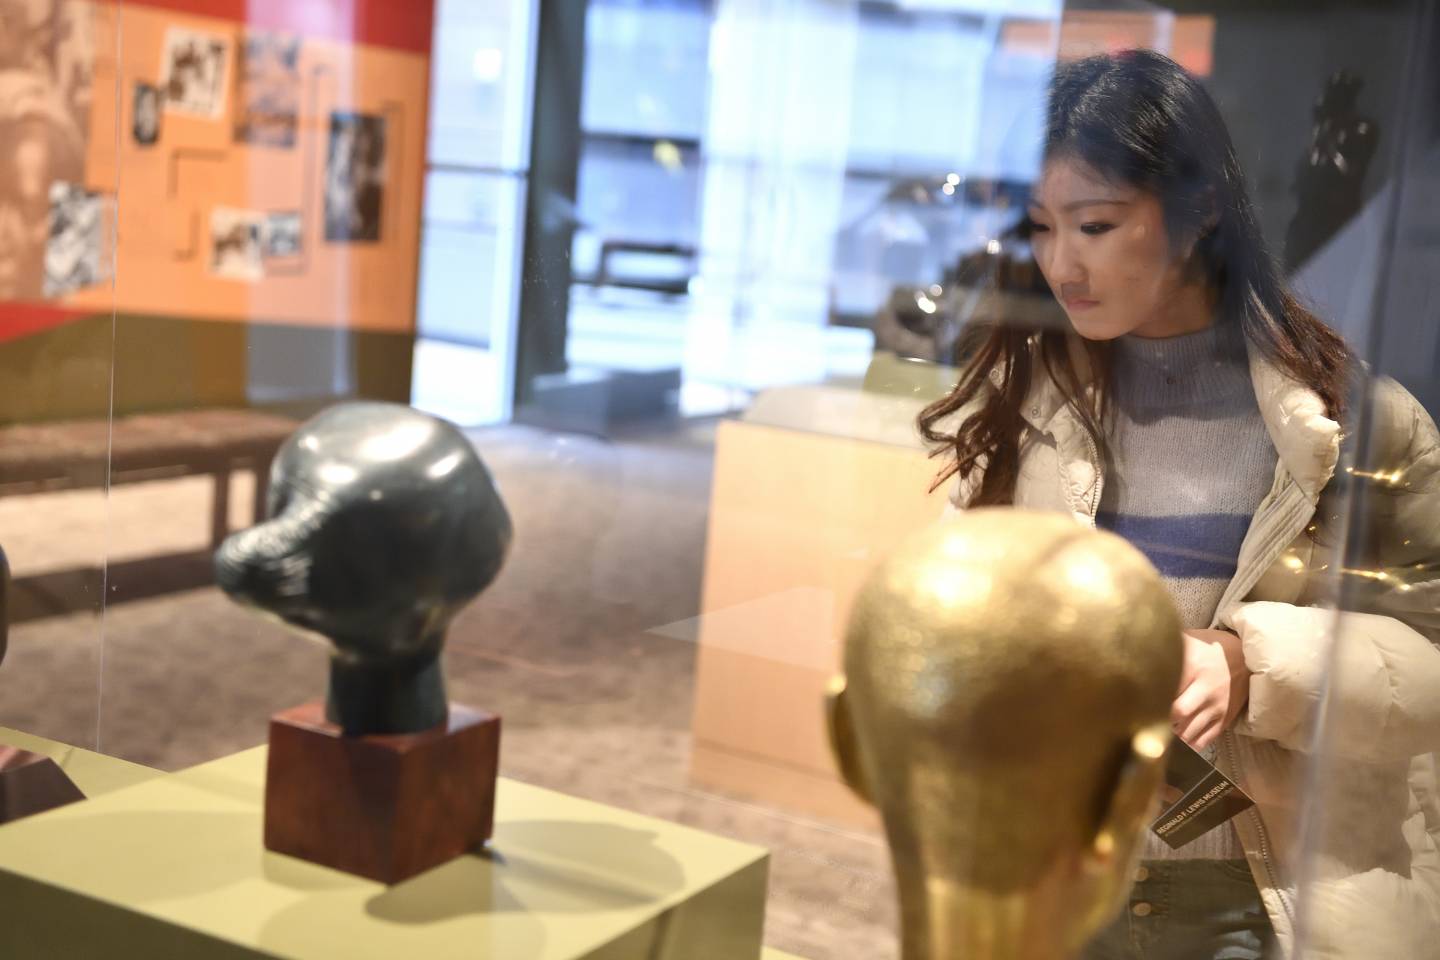 A woman examines an exhibit in a museum